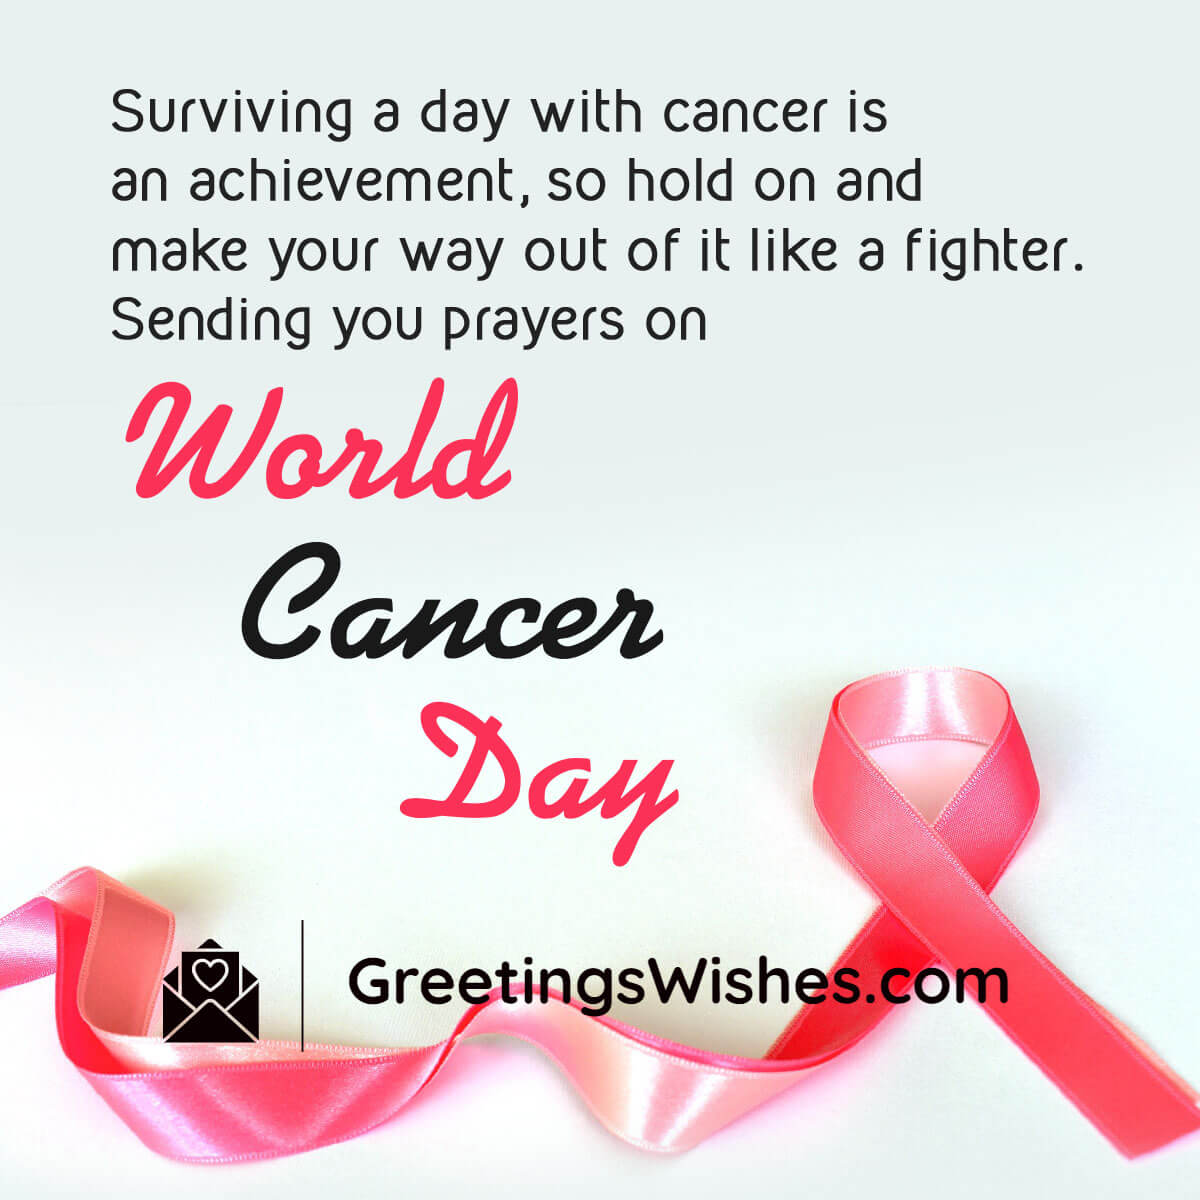 World Cancer Day Wishes